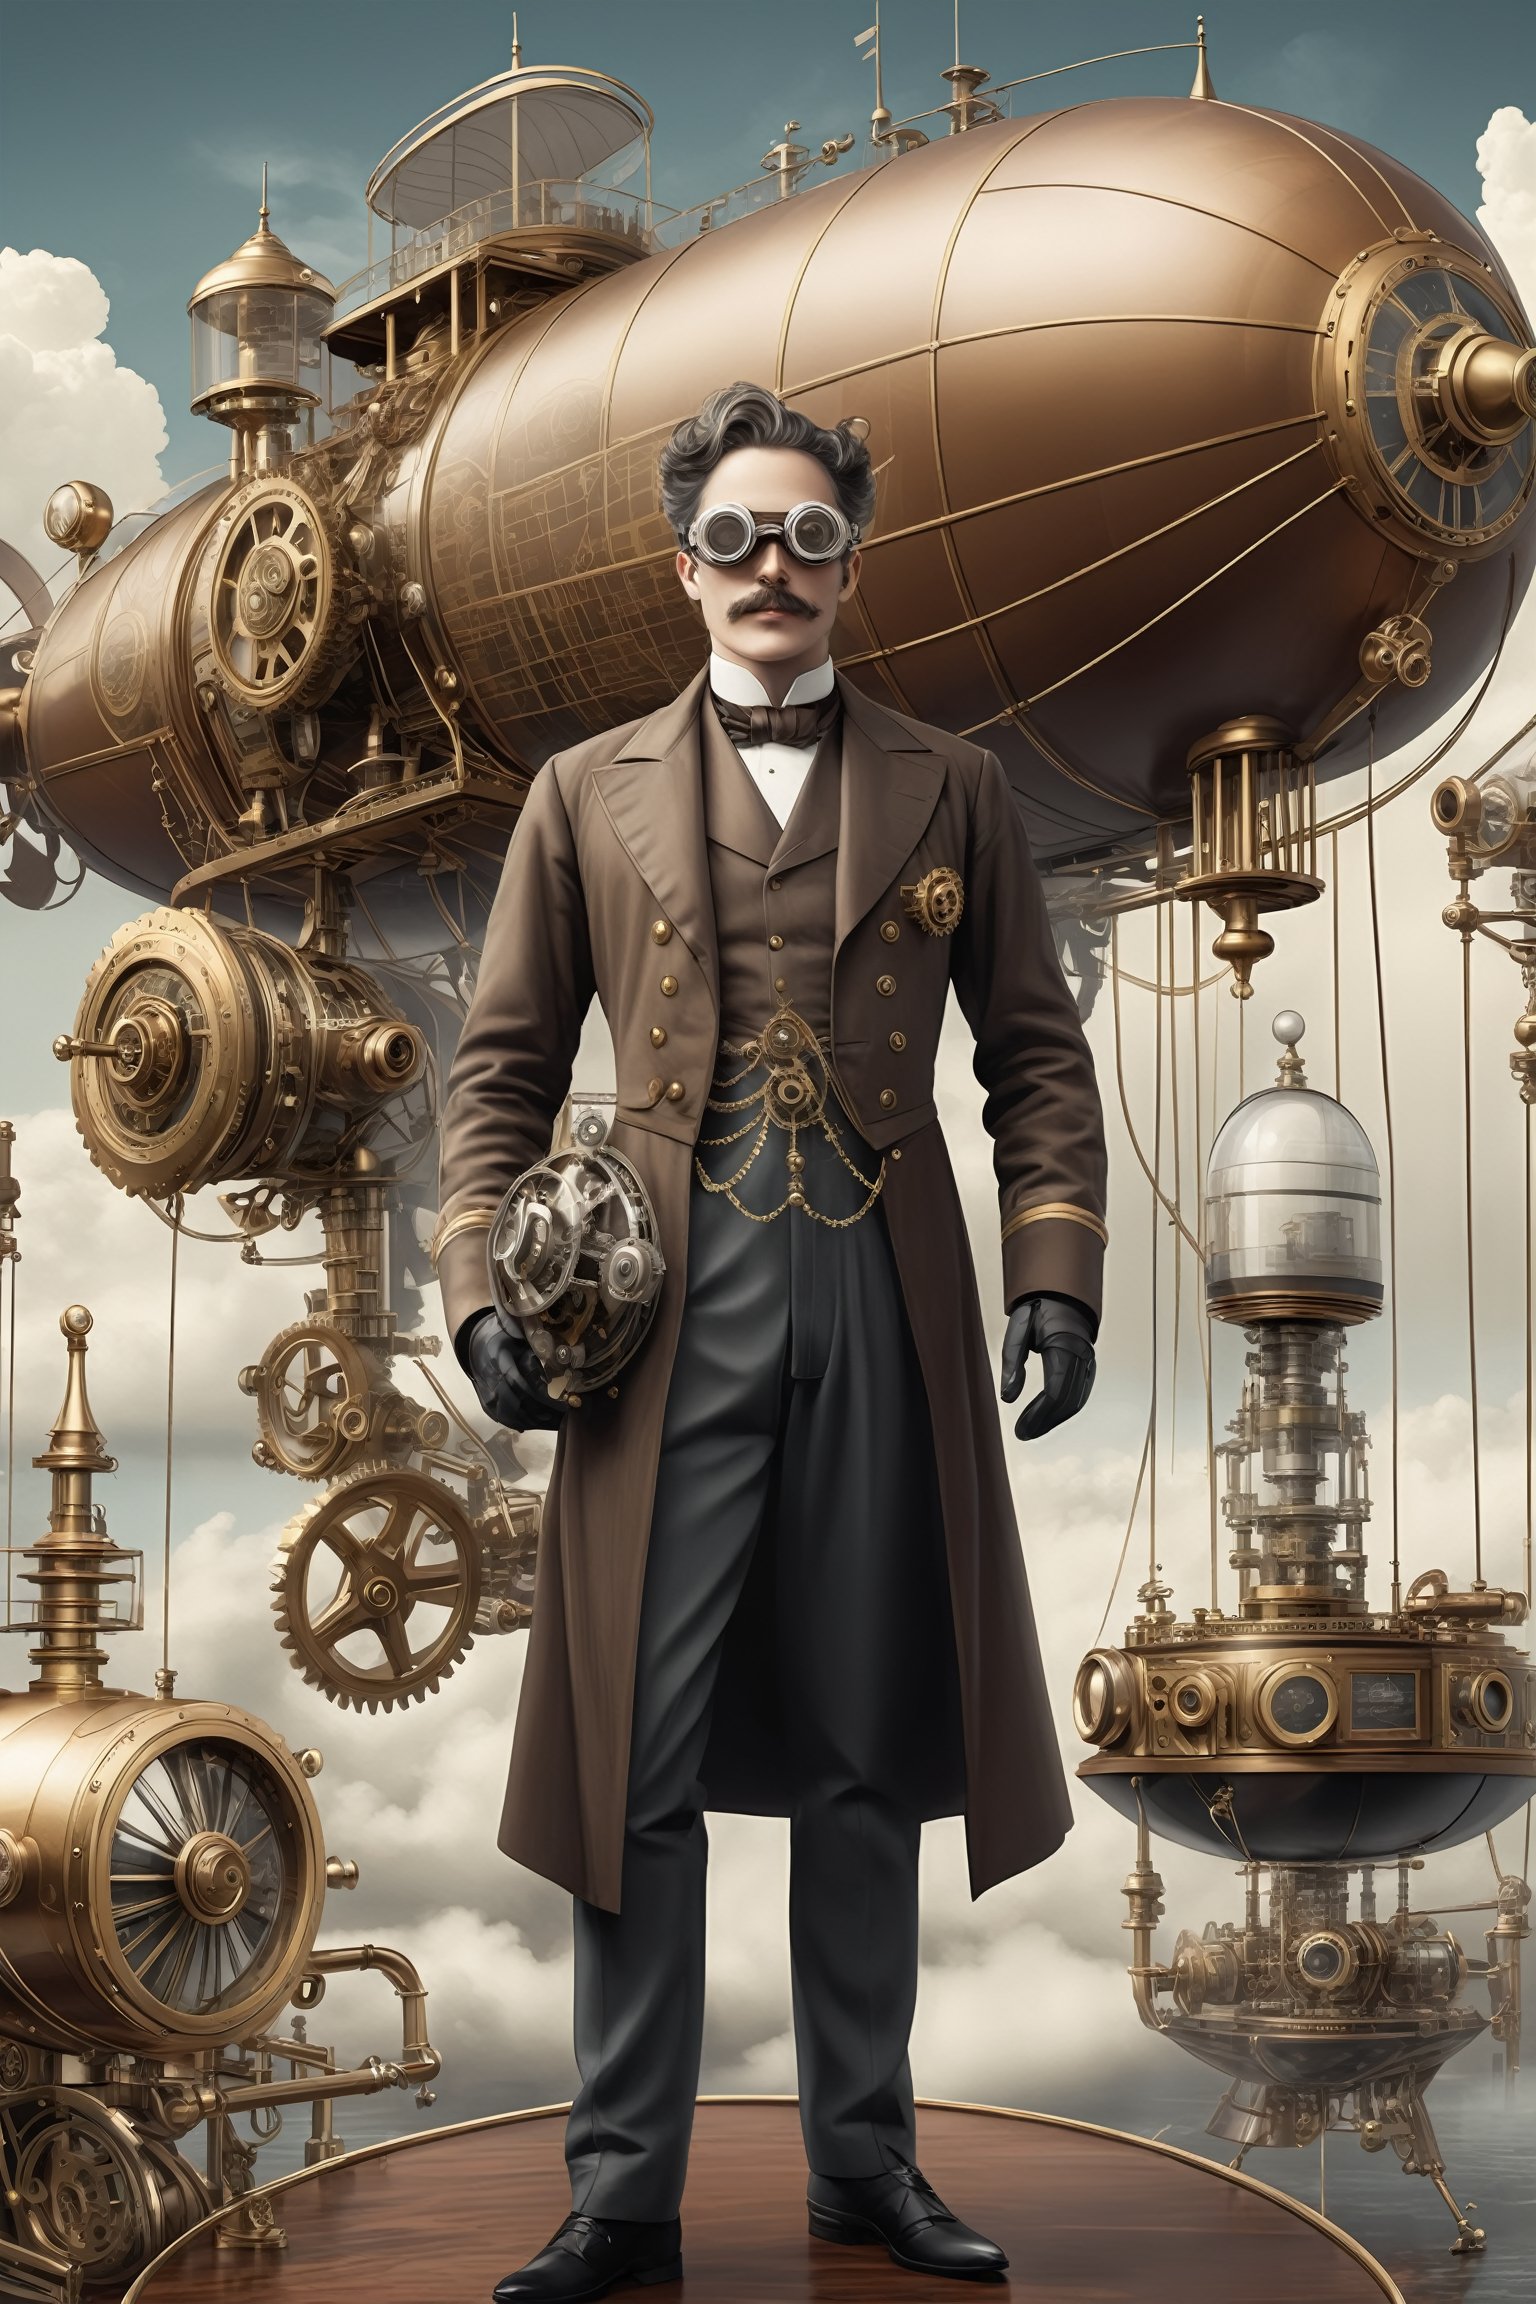 Steampunk illustration, intricate gears, metallic textures, (schematic diagrams overlay:1.3), full body portrait of an inventor wearing goggles and holding a prototype robot, Victorian era aesthetic, airships in the background, steam clouds, full body